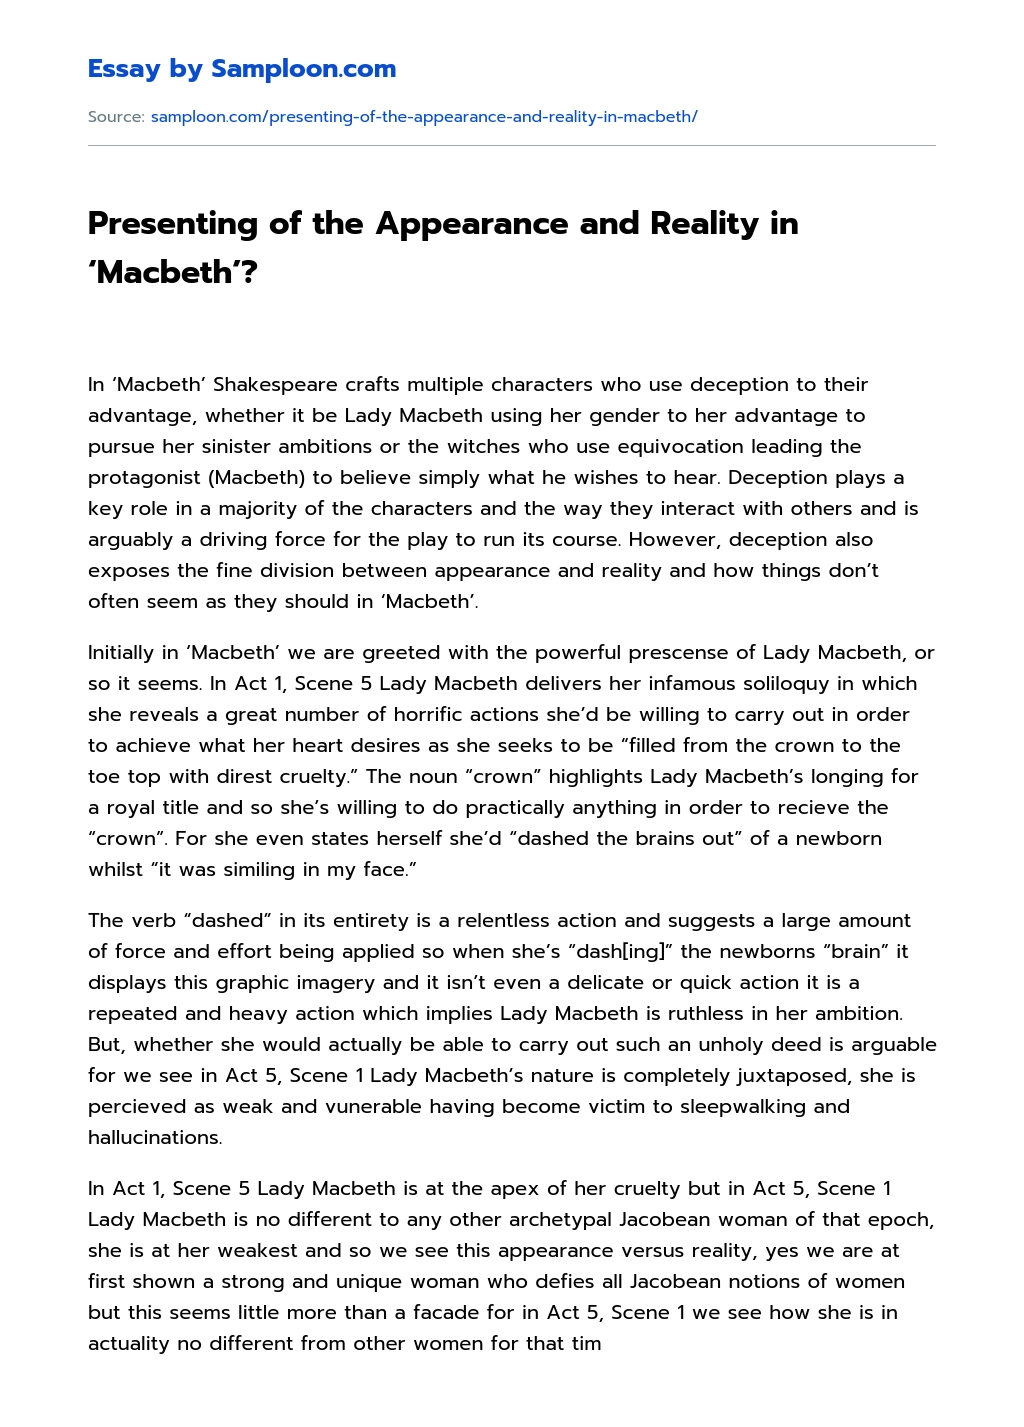 Presenting of the Appearance and Reality in ‘Macbeth’? Analytical Essay essay